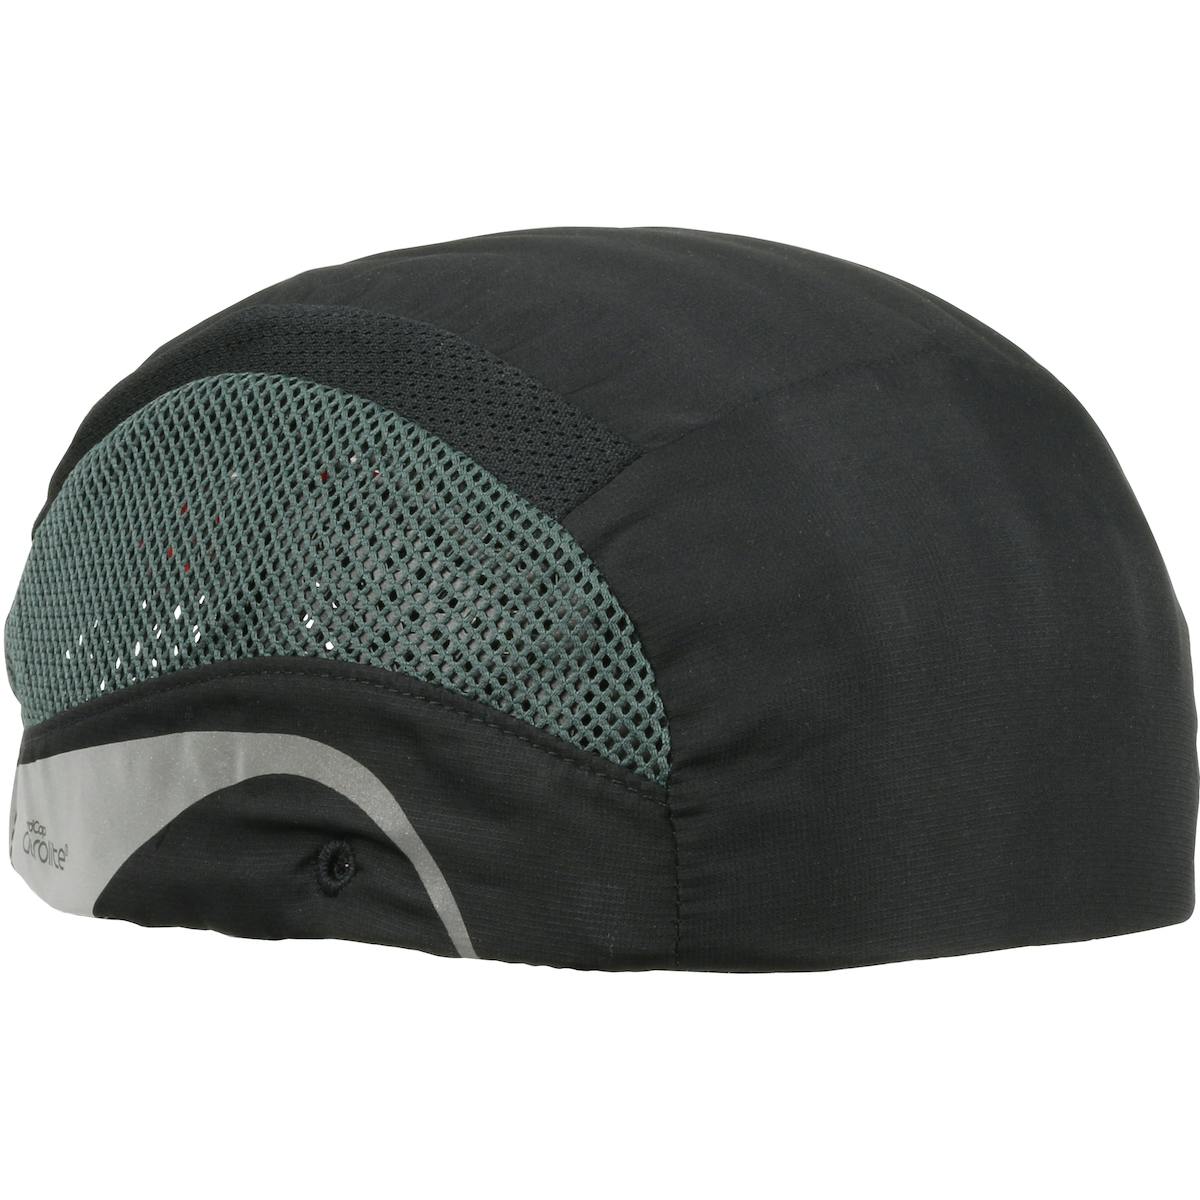 HardCap Aerolite™ Lightweight Baseball Style Bump Cap with HDPE Protective Liner and Adjustable Back - Brimless (282-AEN000)